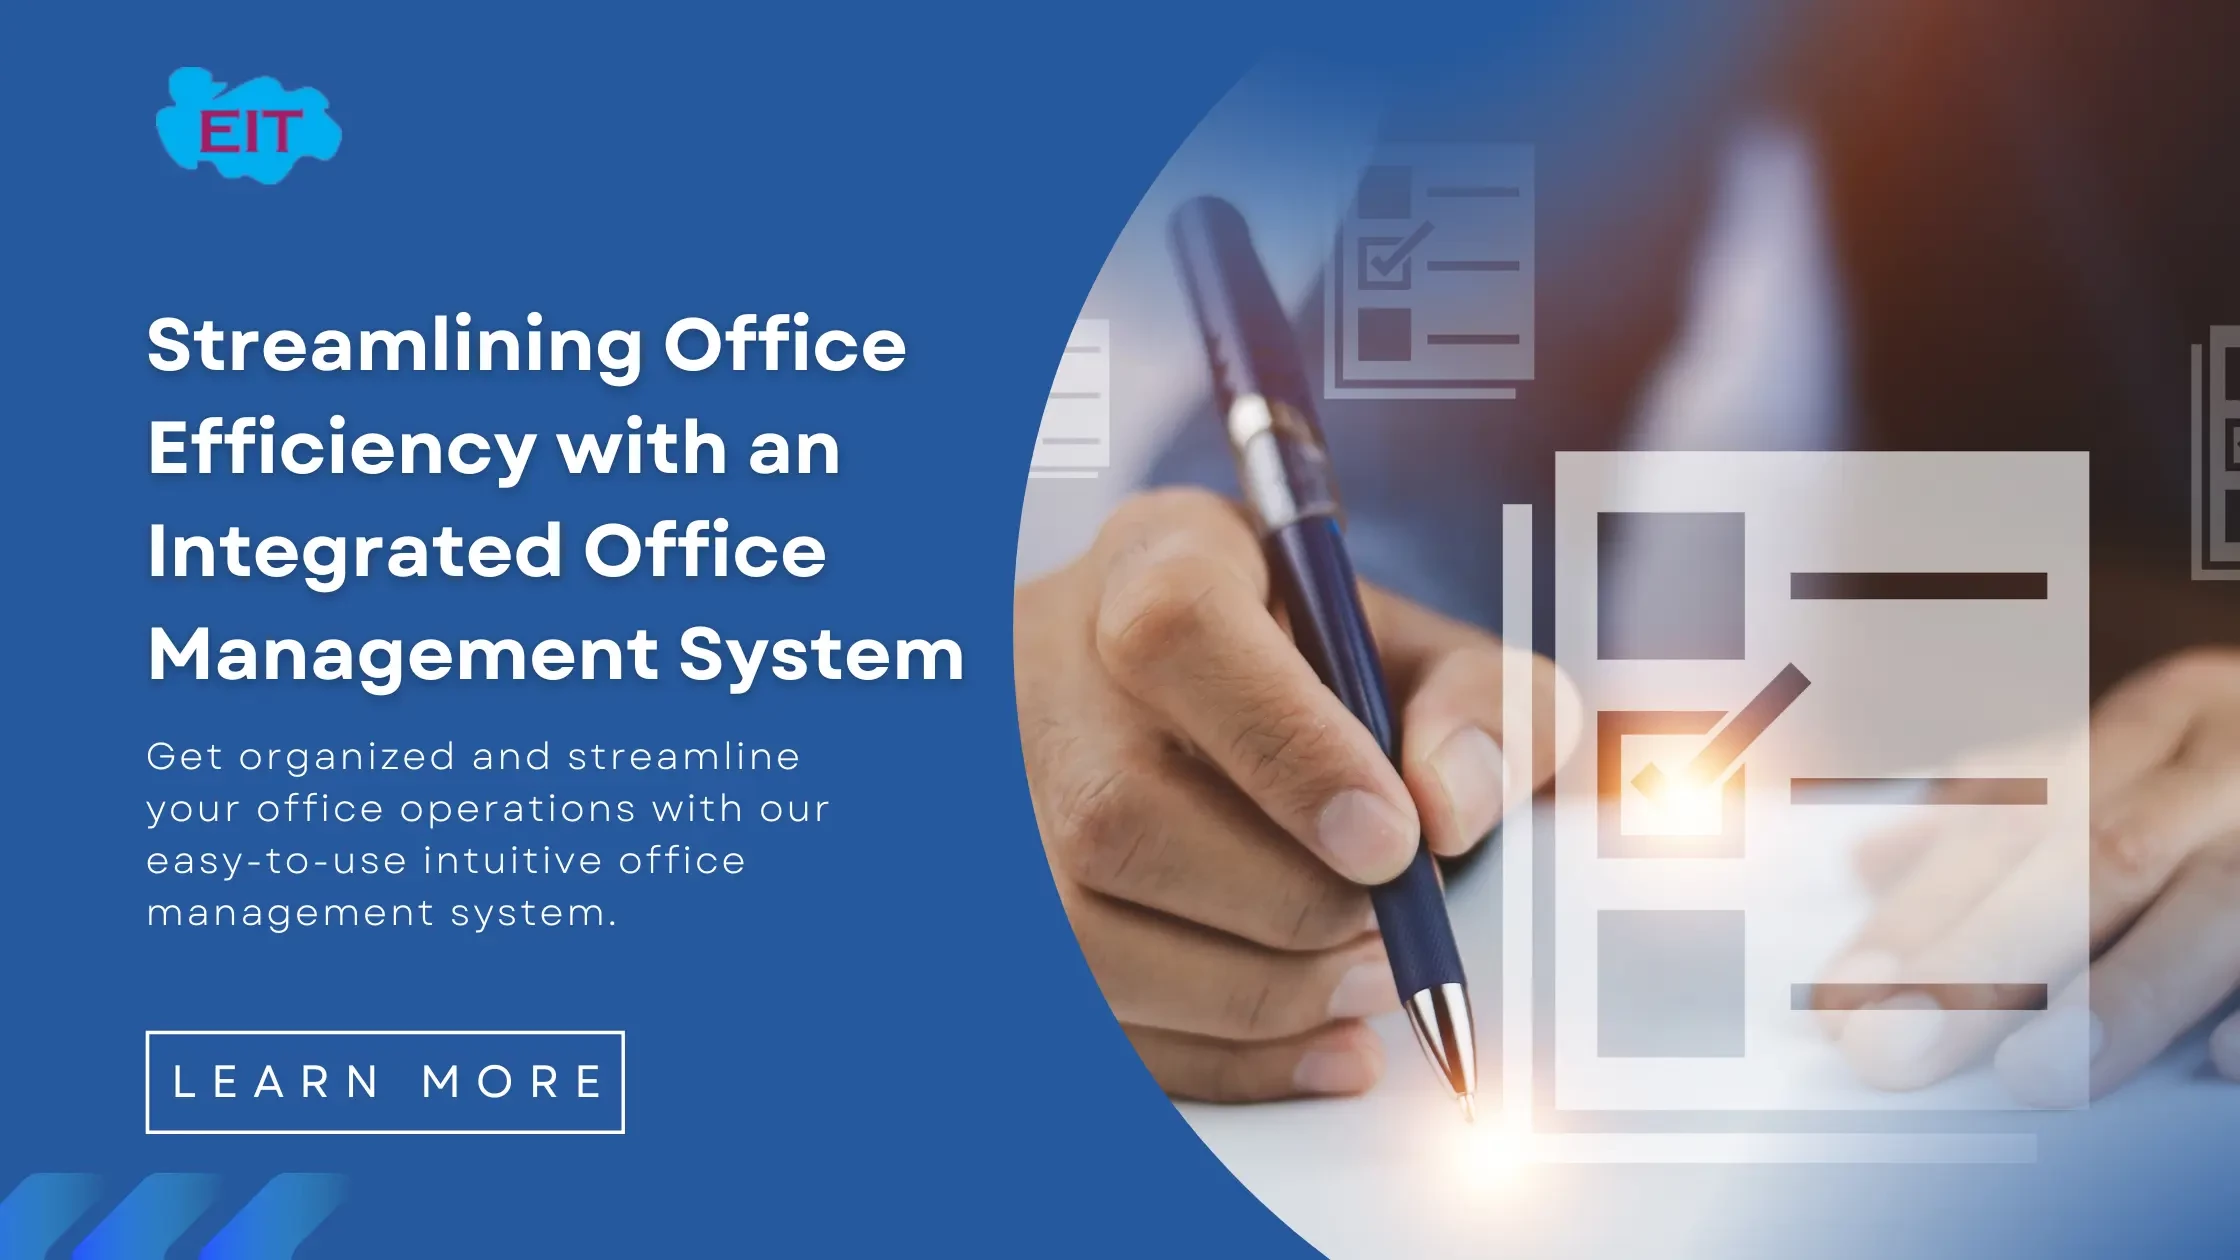 Streamlining Office Efficiency with an Integrated Office Management System